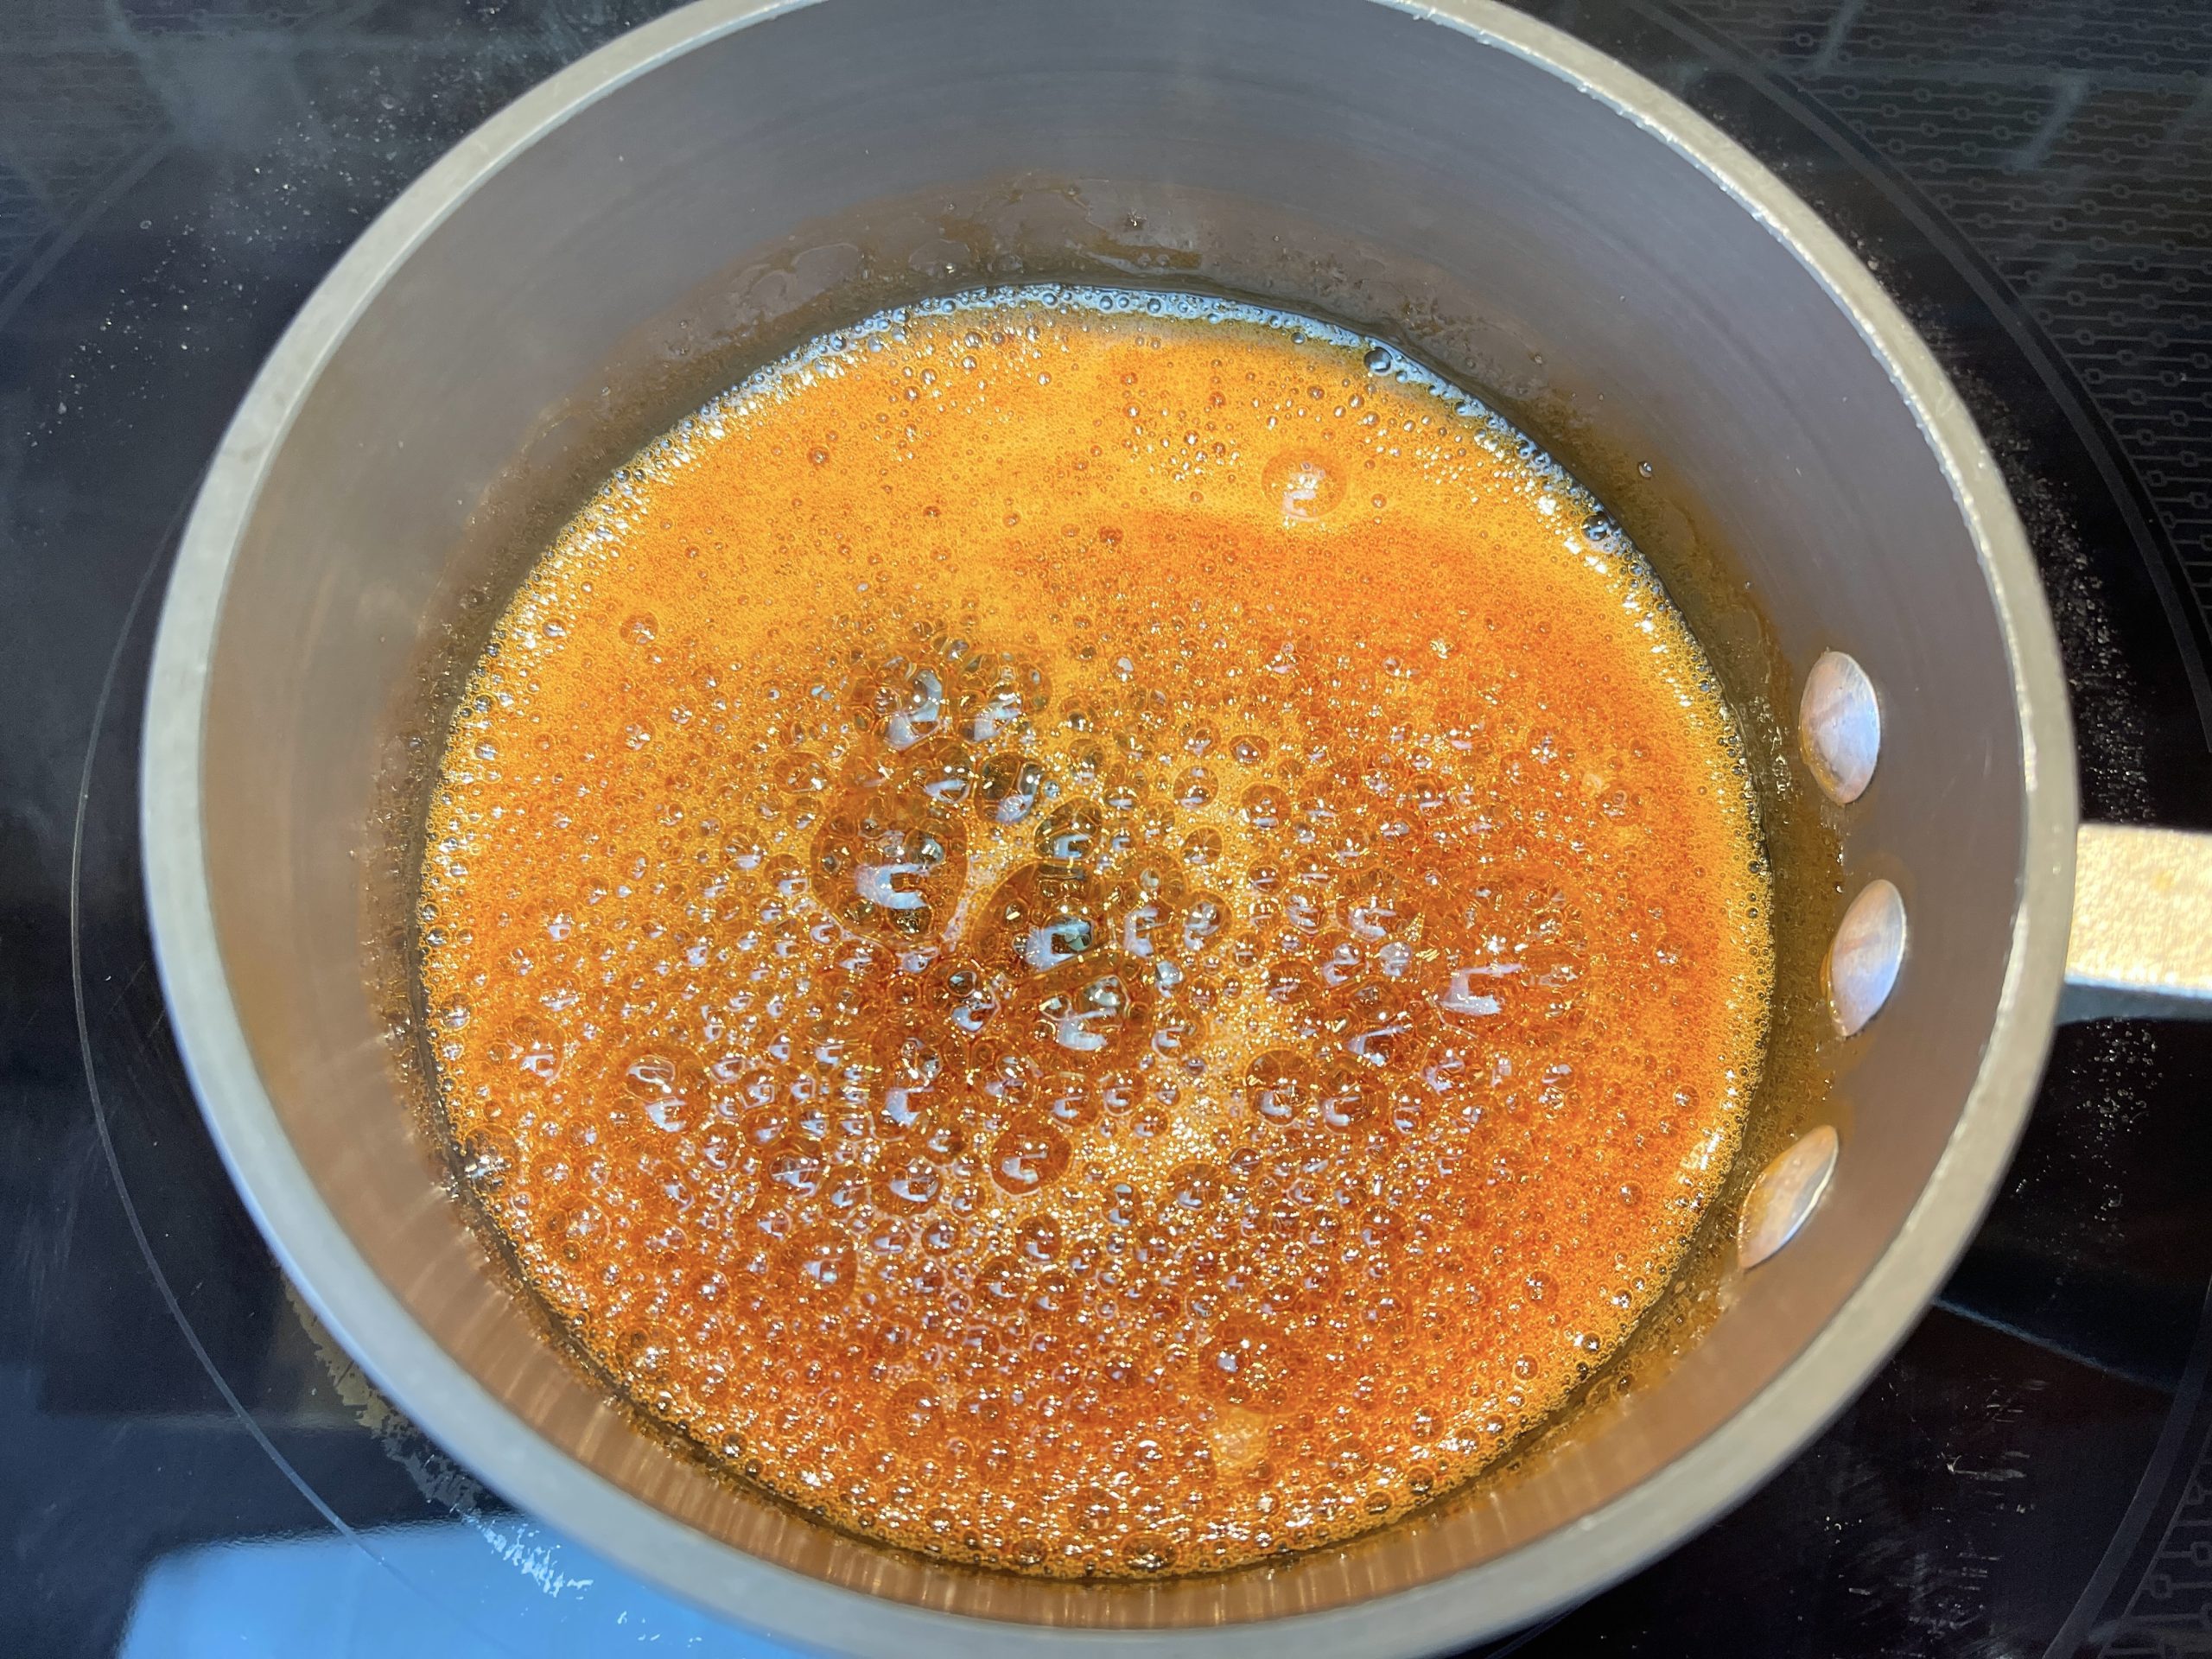 Cook sugar/water for 10-12 minutes until deep amber